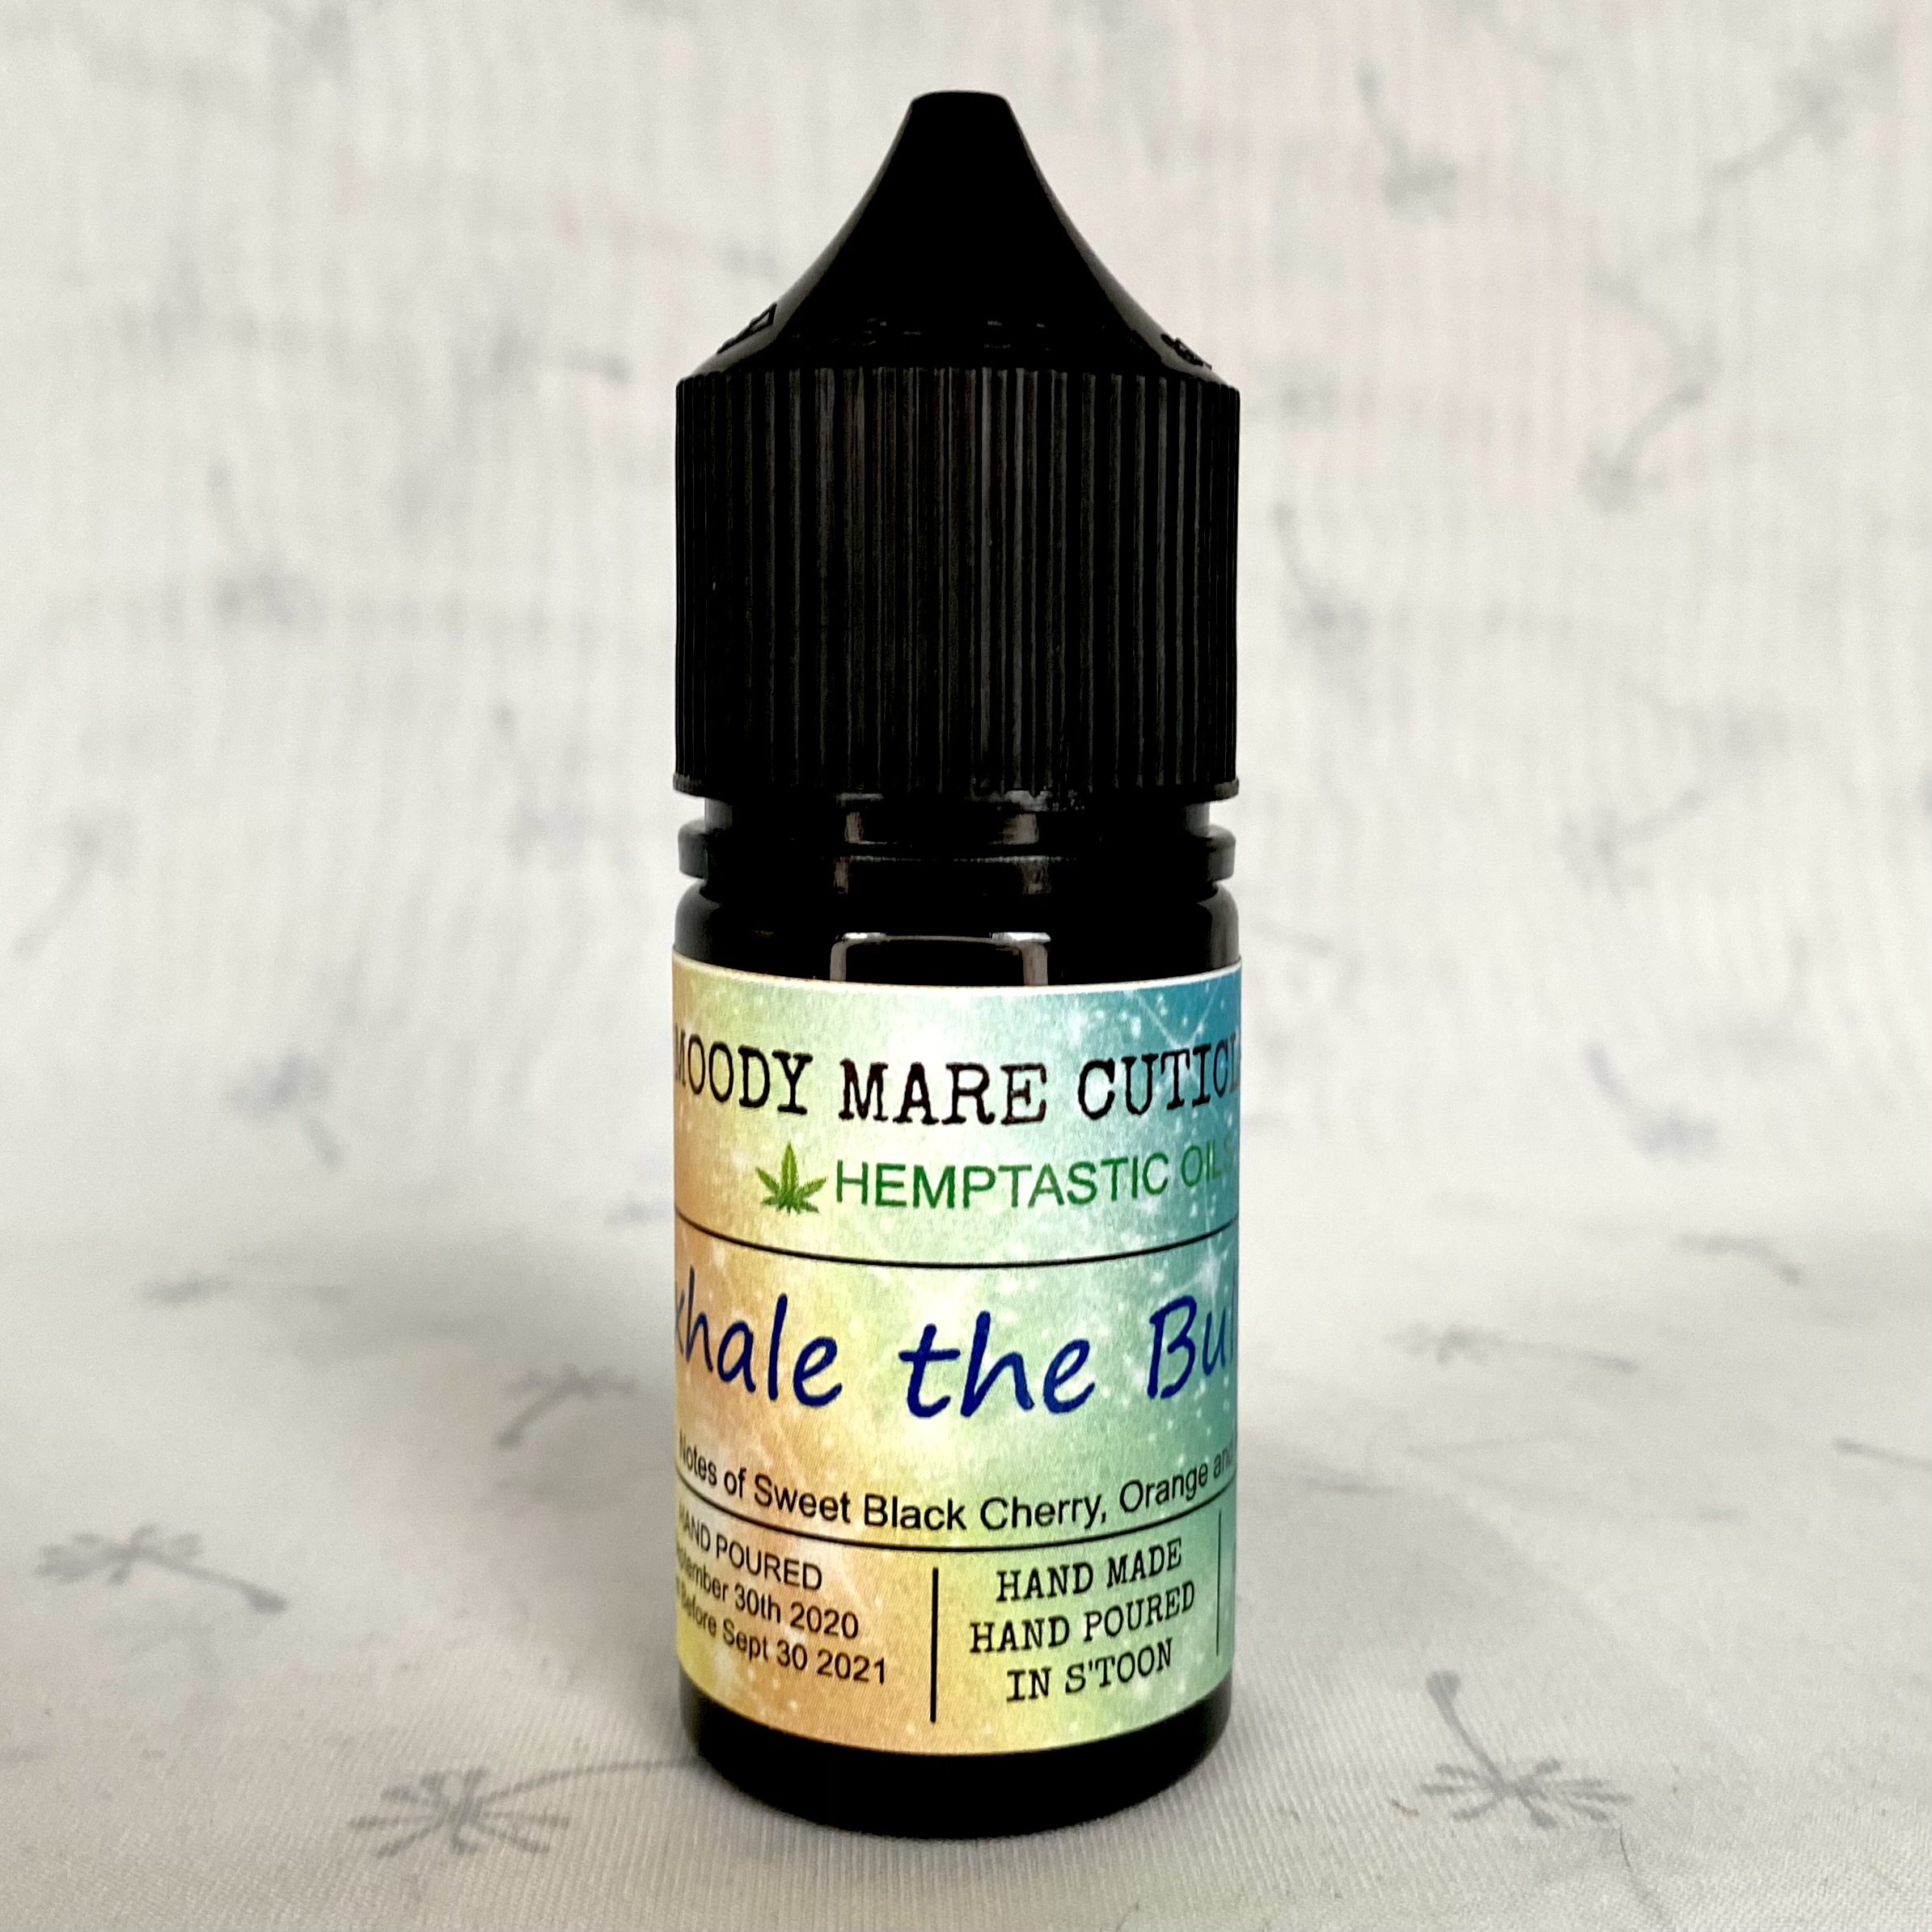 Exhale the Bull$h*t Cuticle Oil